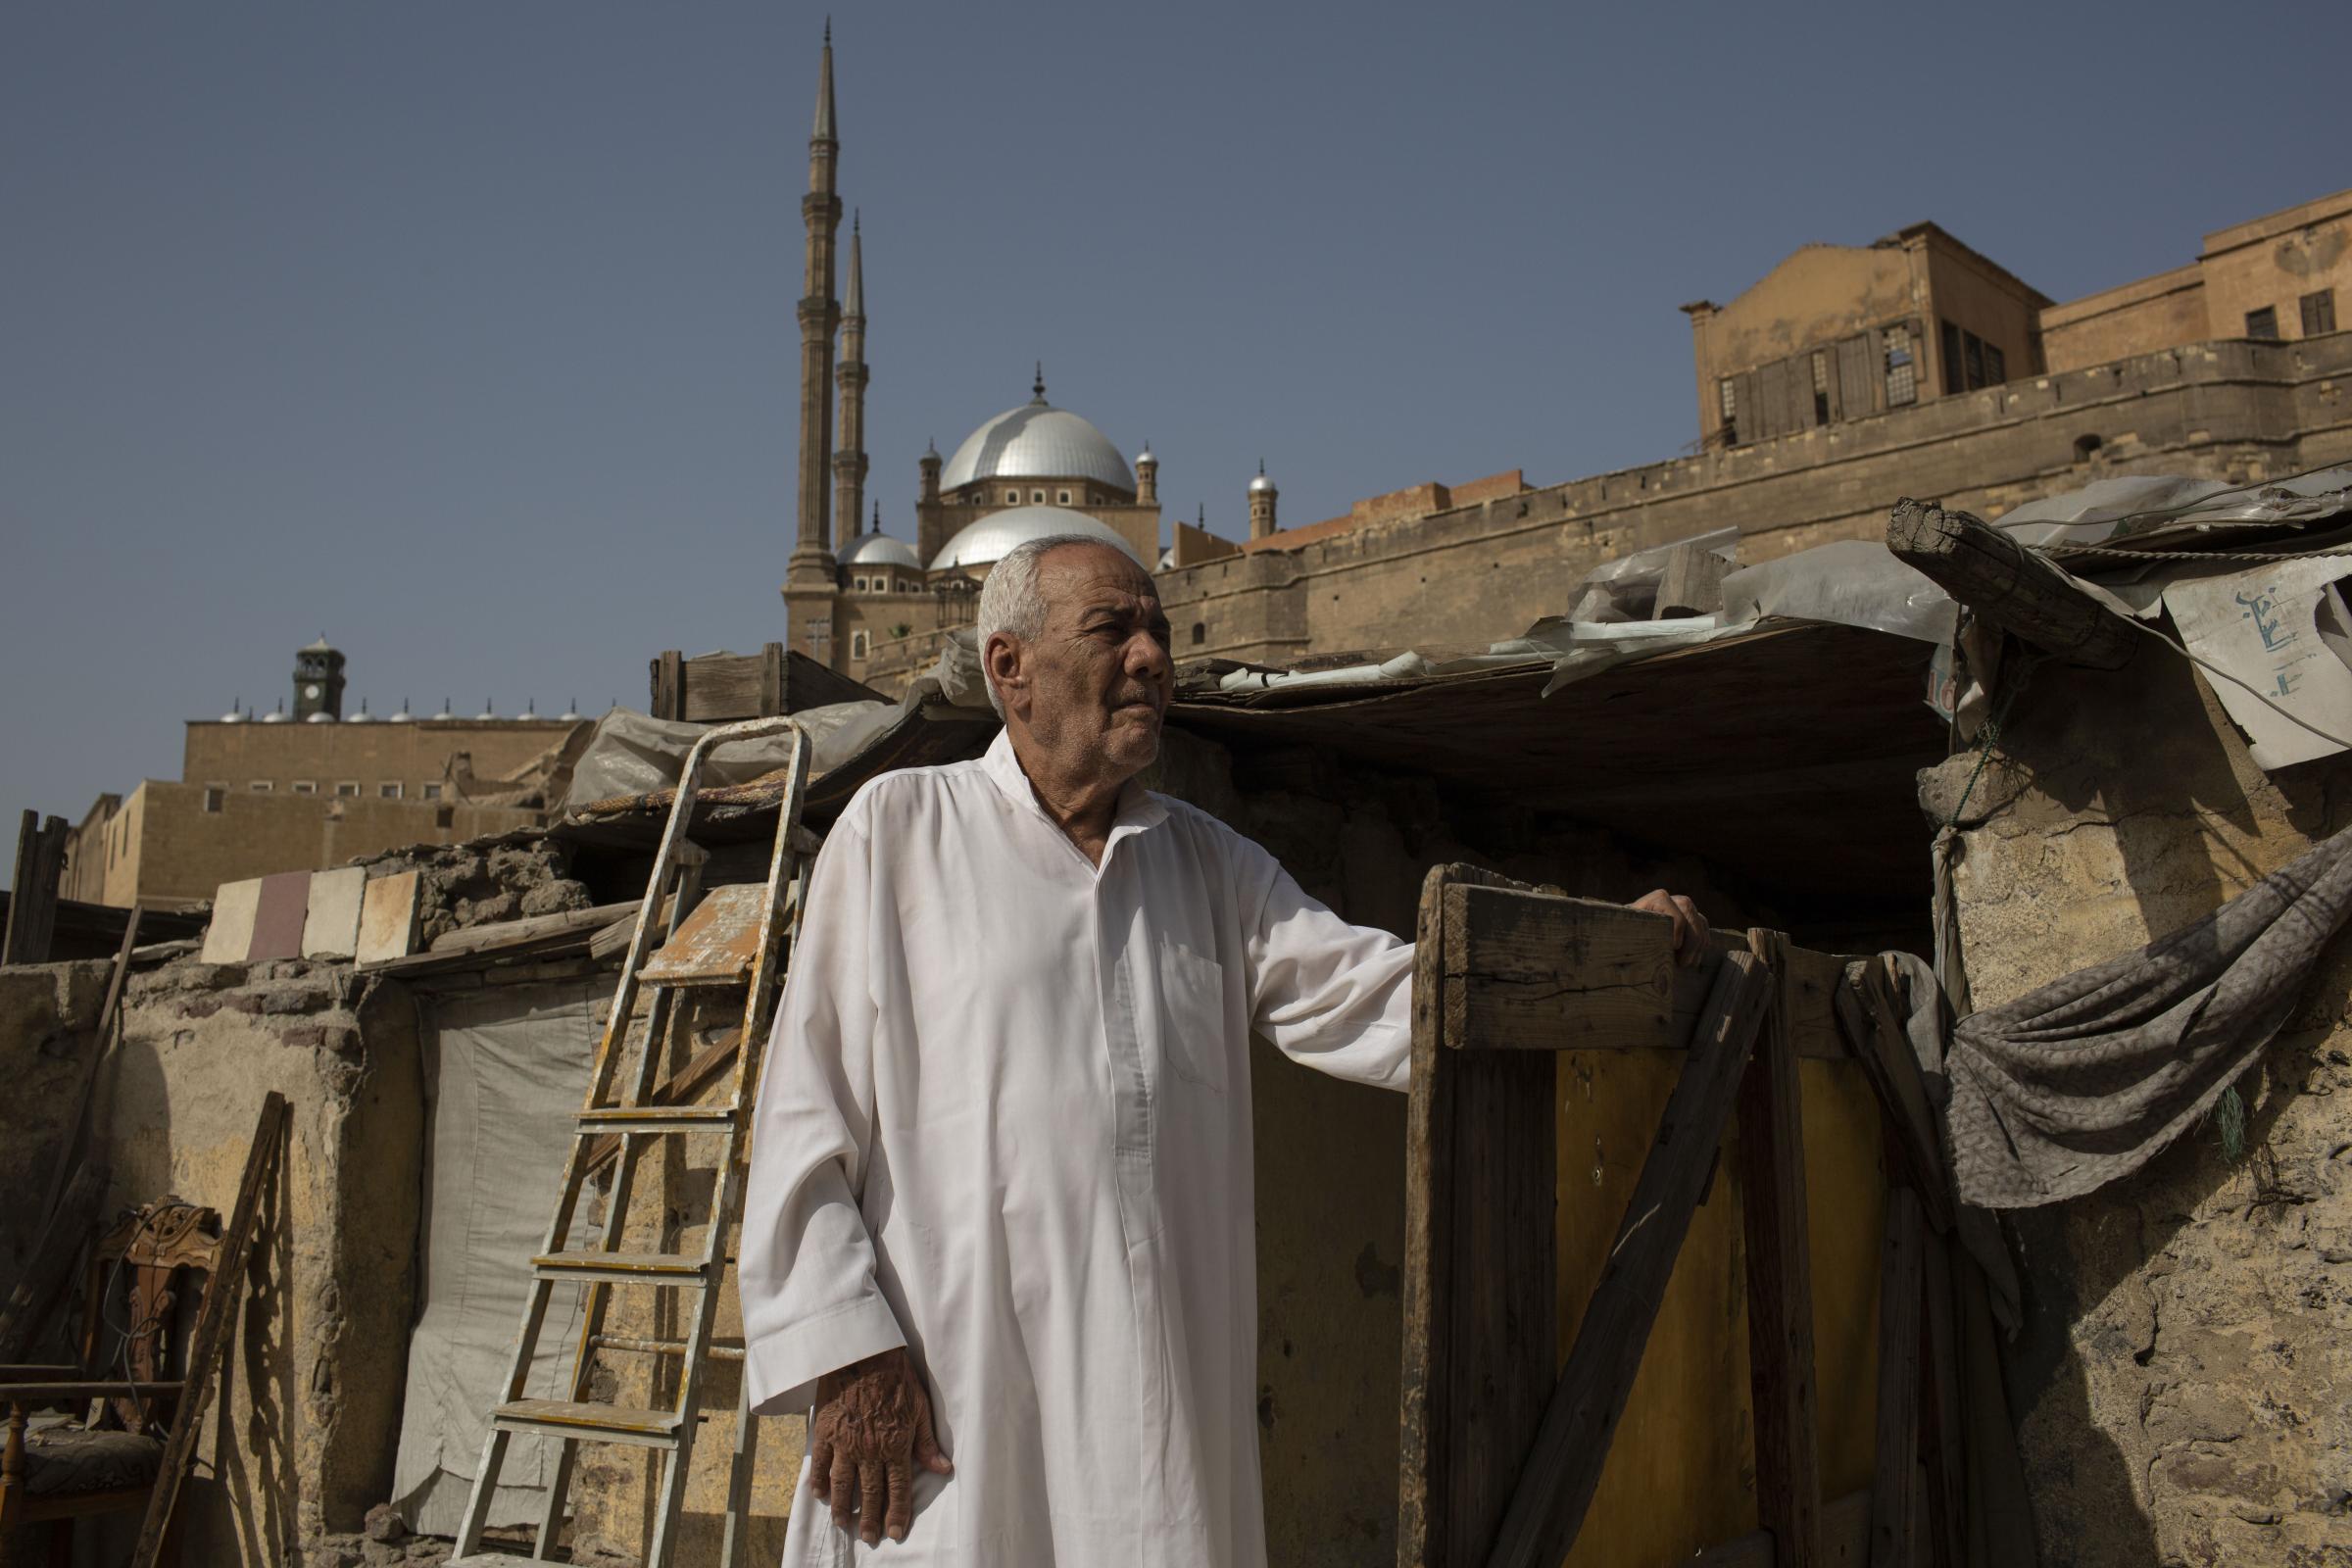 Ahmed Maher, 83, stands outside his home in the Majid house, built in 1880, which he hopes will not be demolished, across The City of the Dead,...